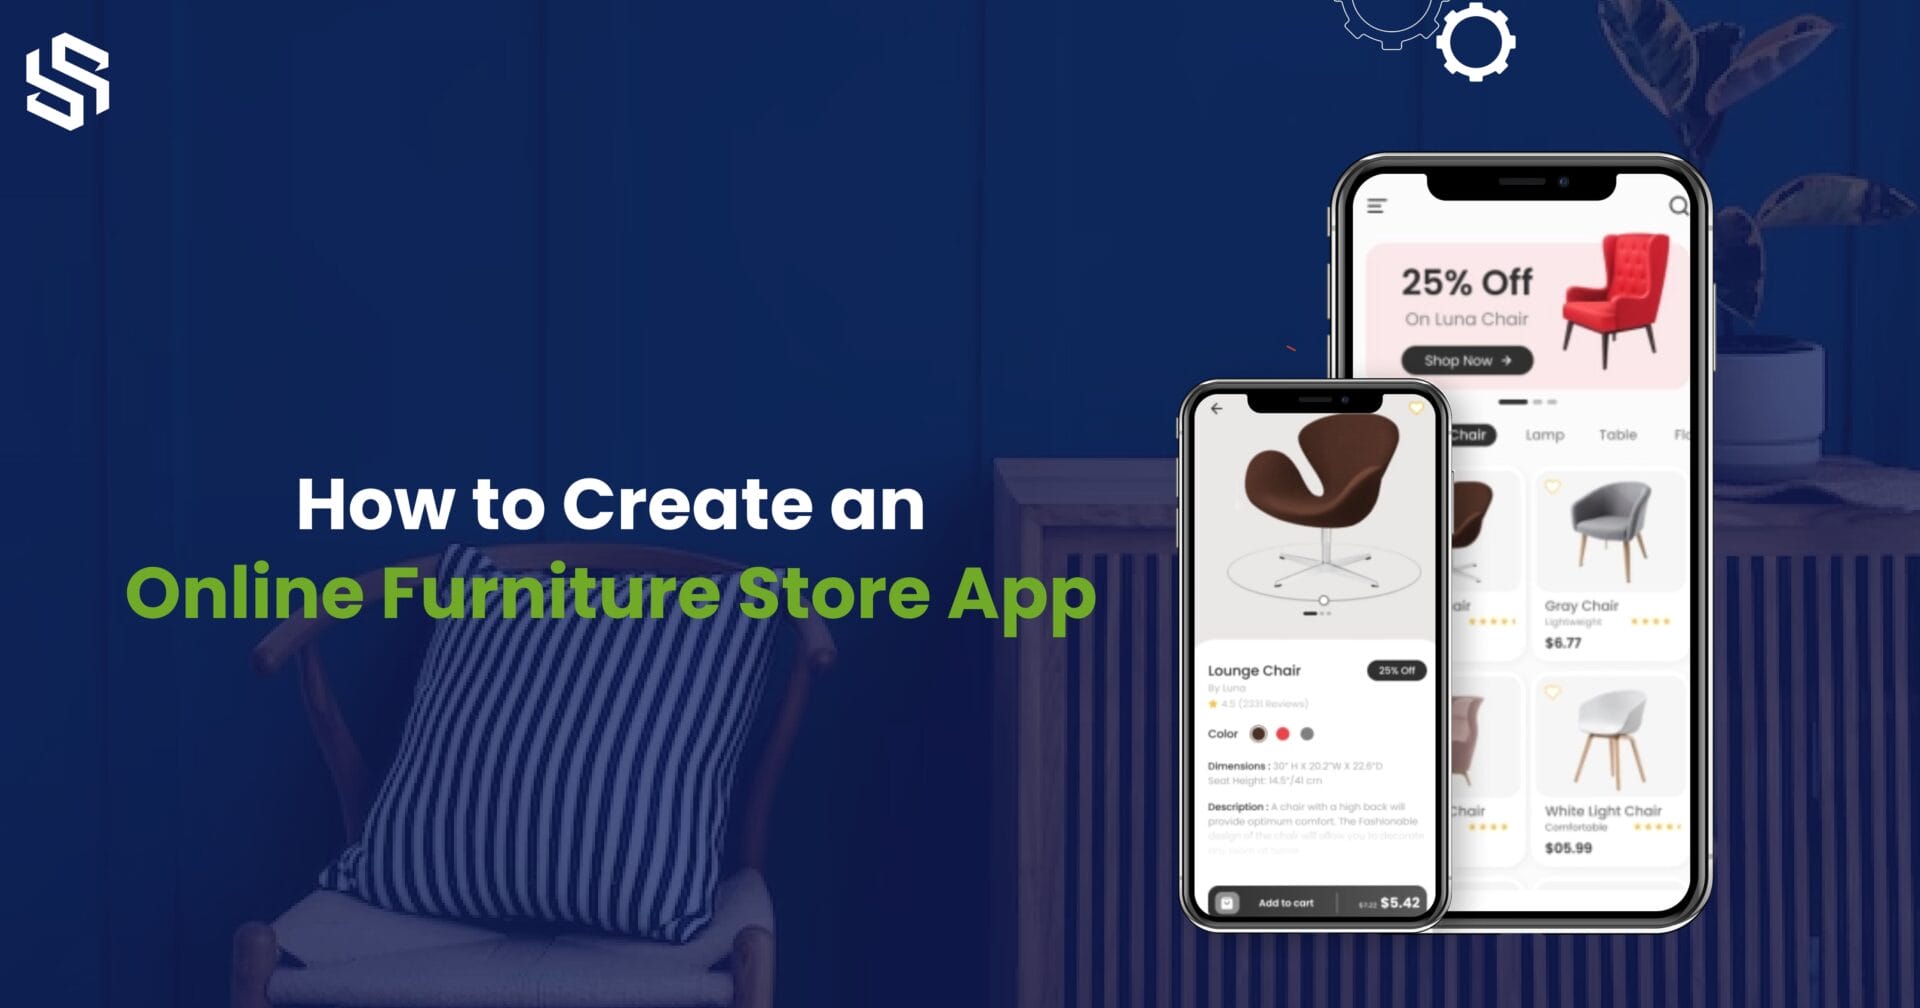 How to Create an Online Furniture Store App